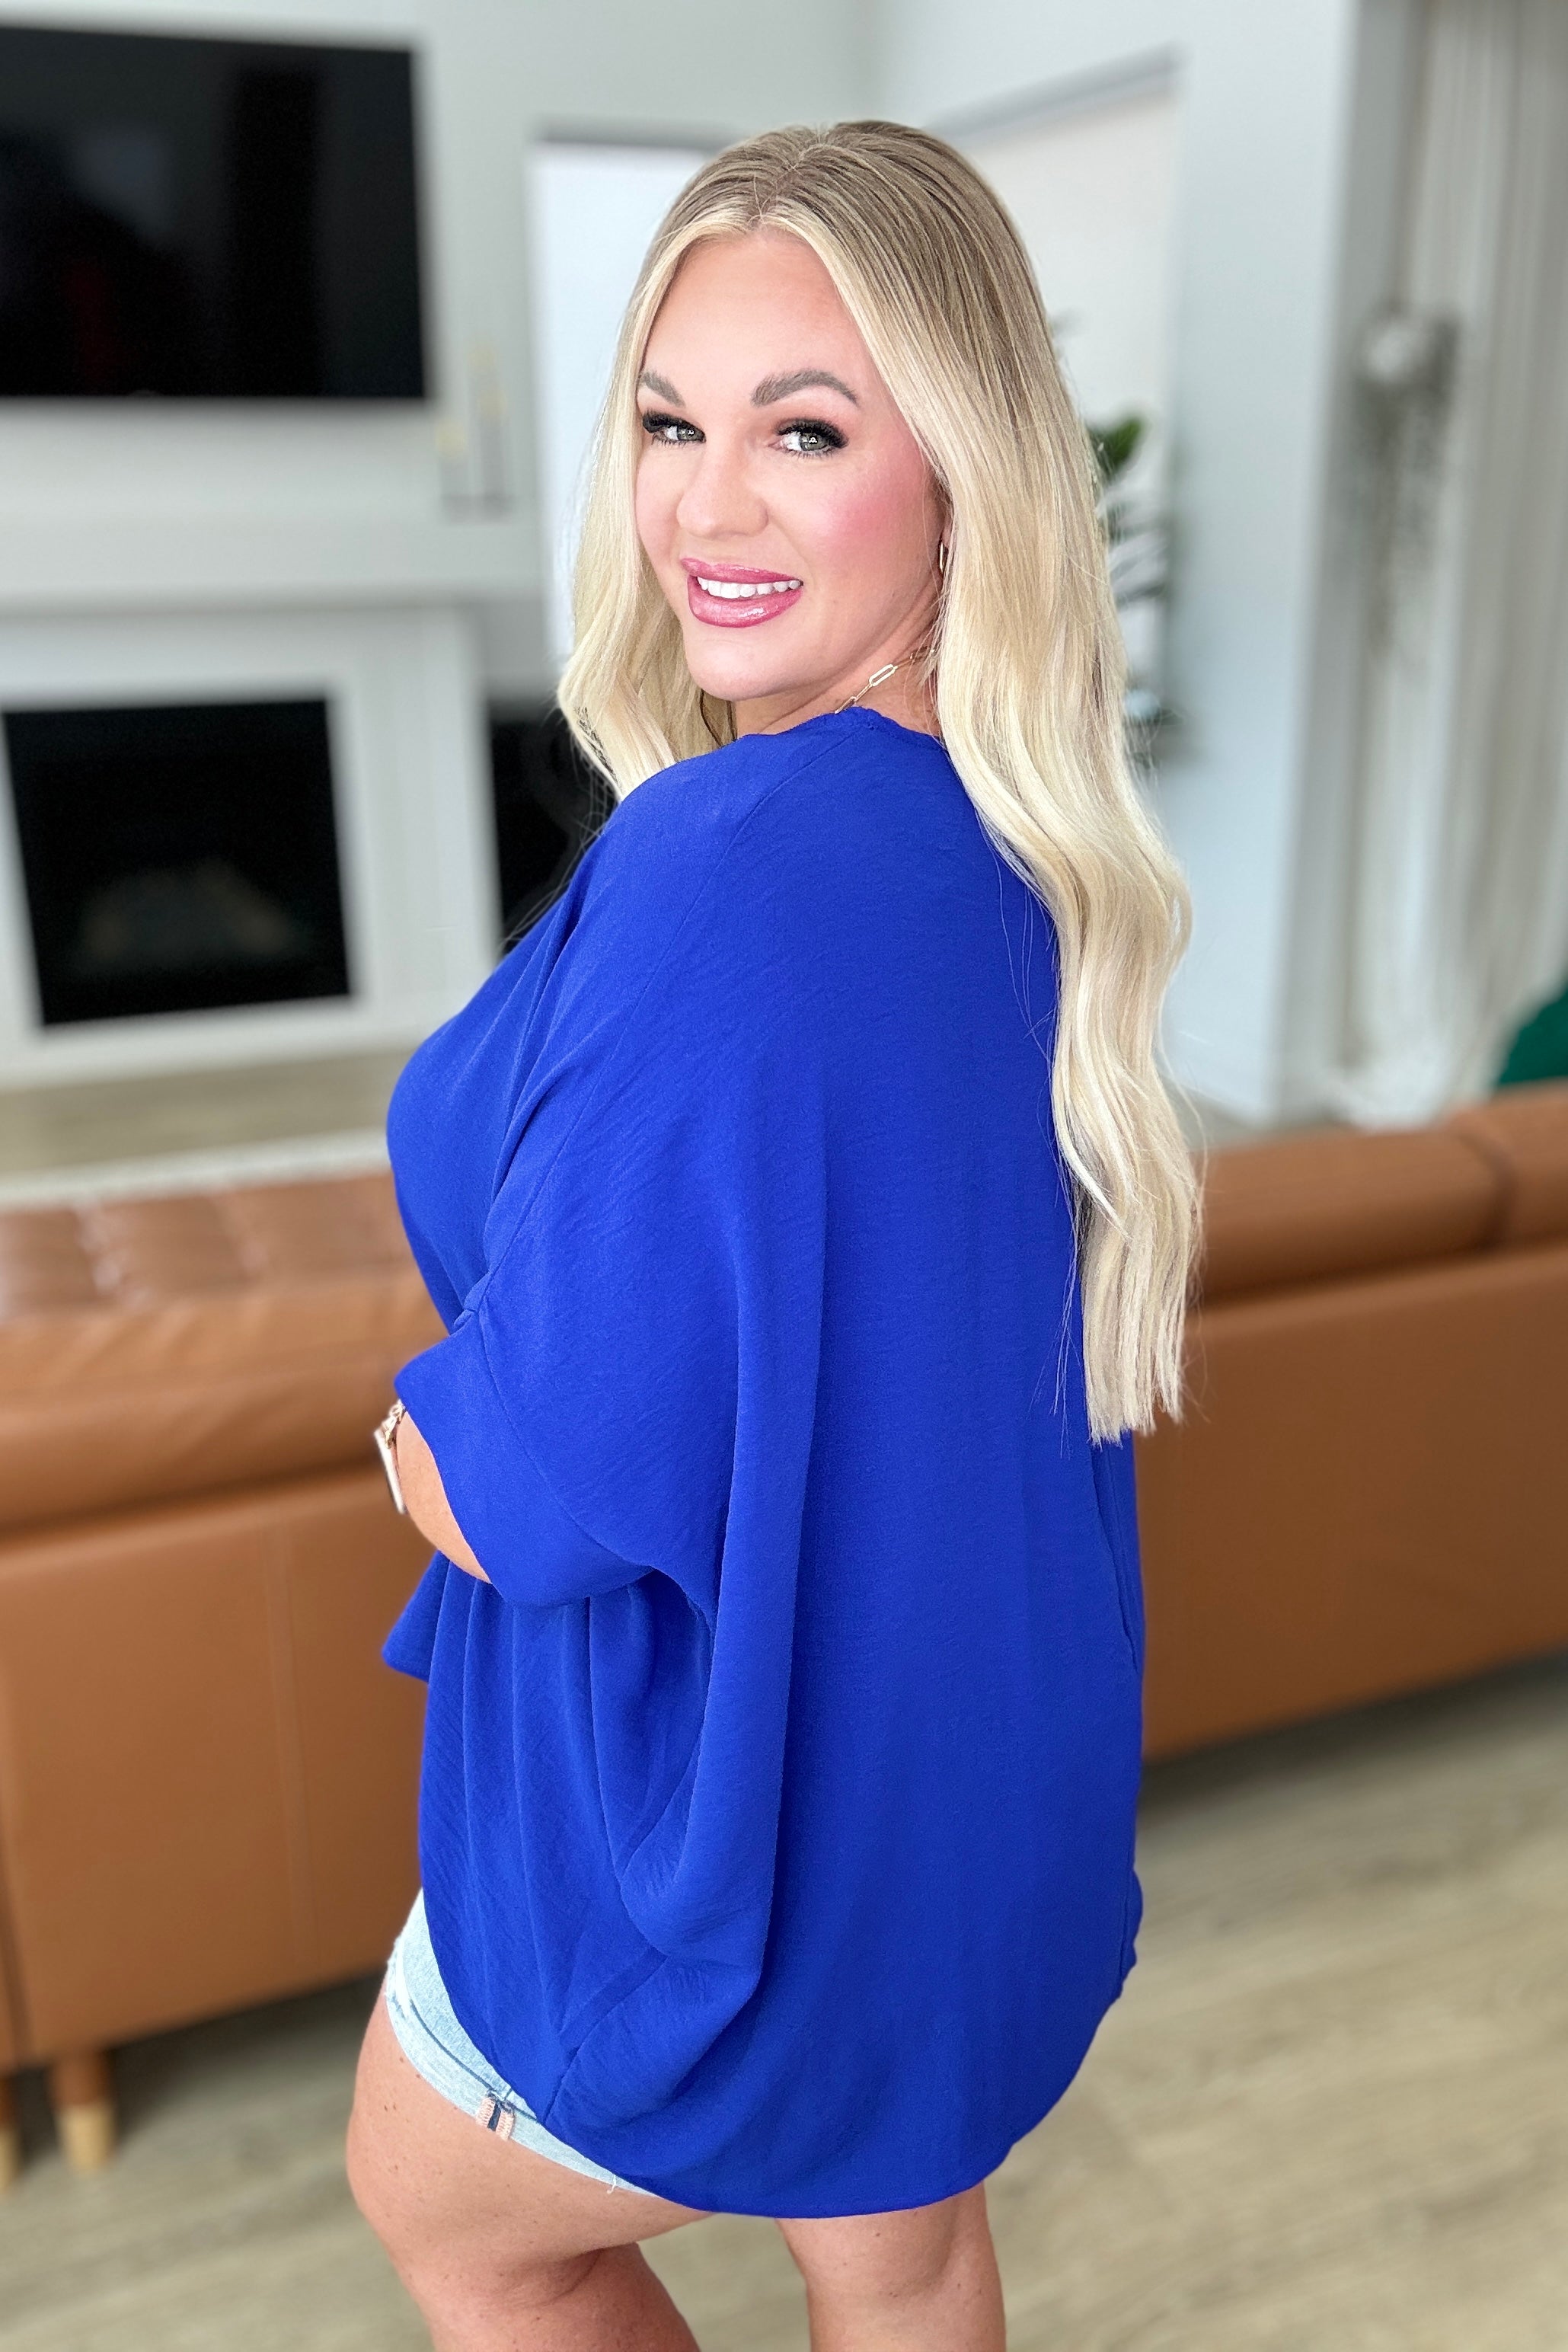 Andree by Unit Feels Like Me Dolman Sleeve Top in Royal Blue Ave Shops